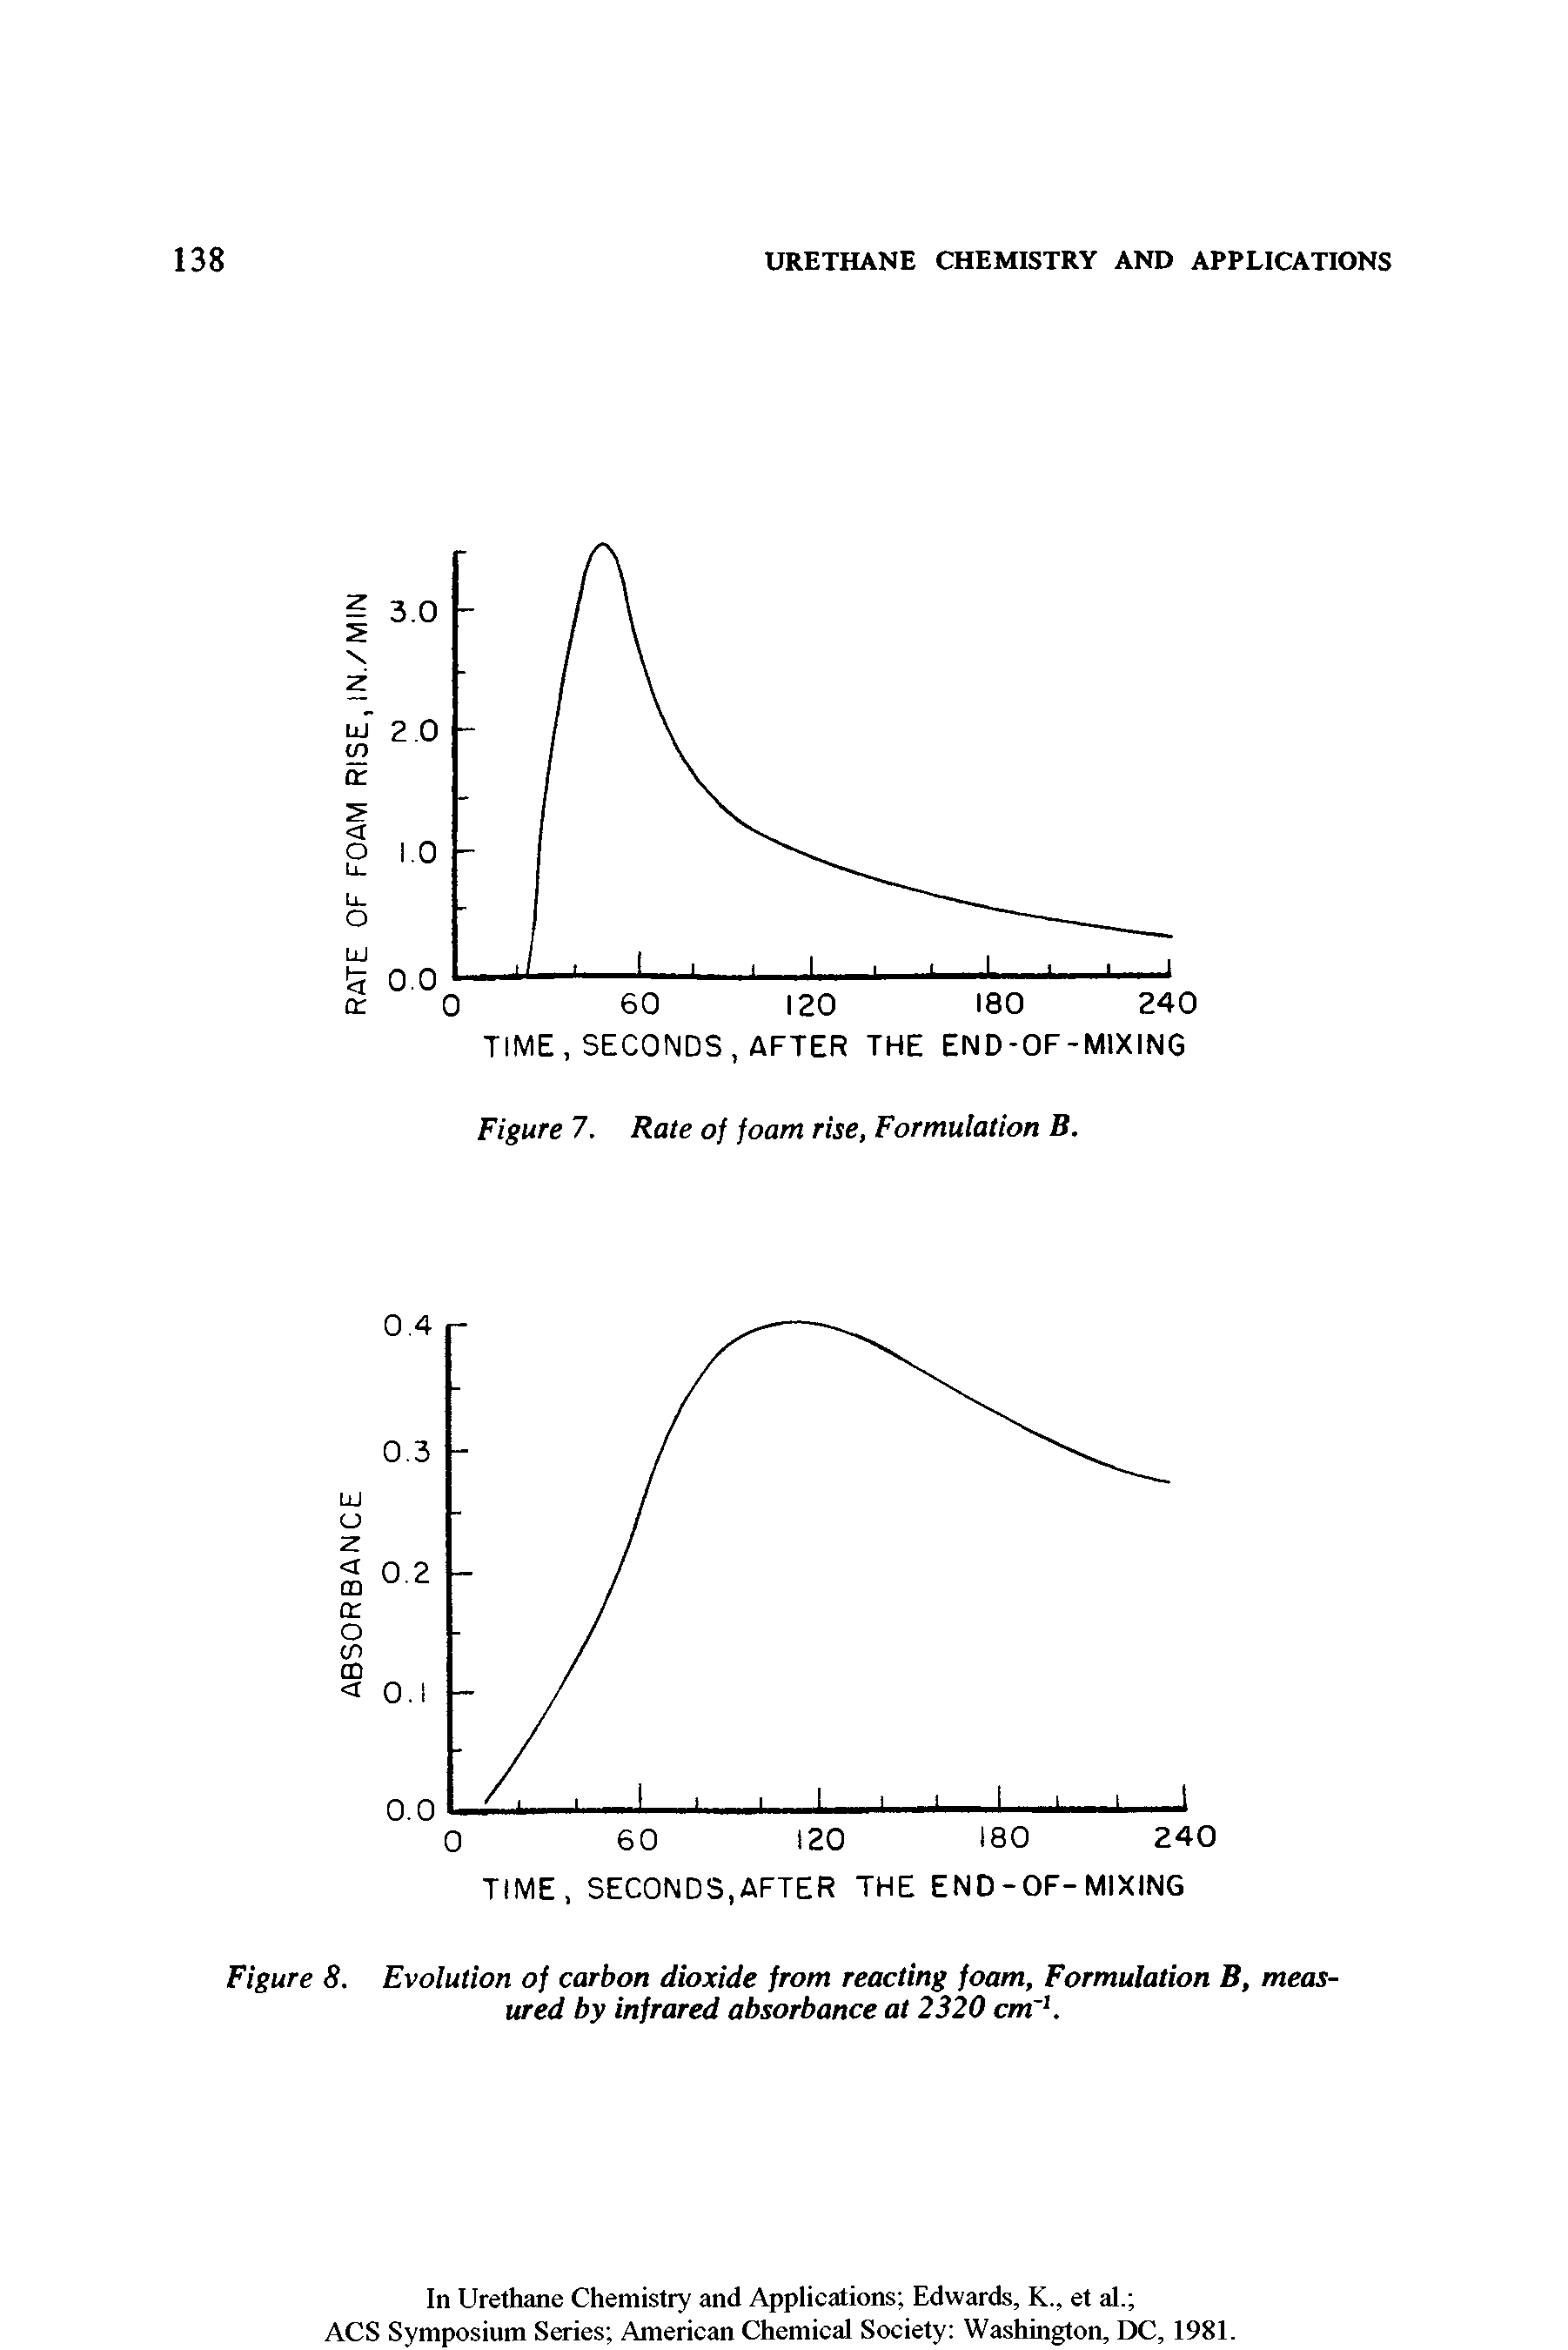 Figure 8. Evolution of carbon dioxide from reacting foam, Formulation B, measured by infrared absorbance at 2320 cm 1.